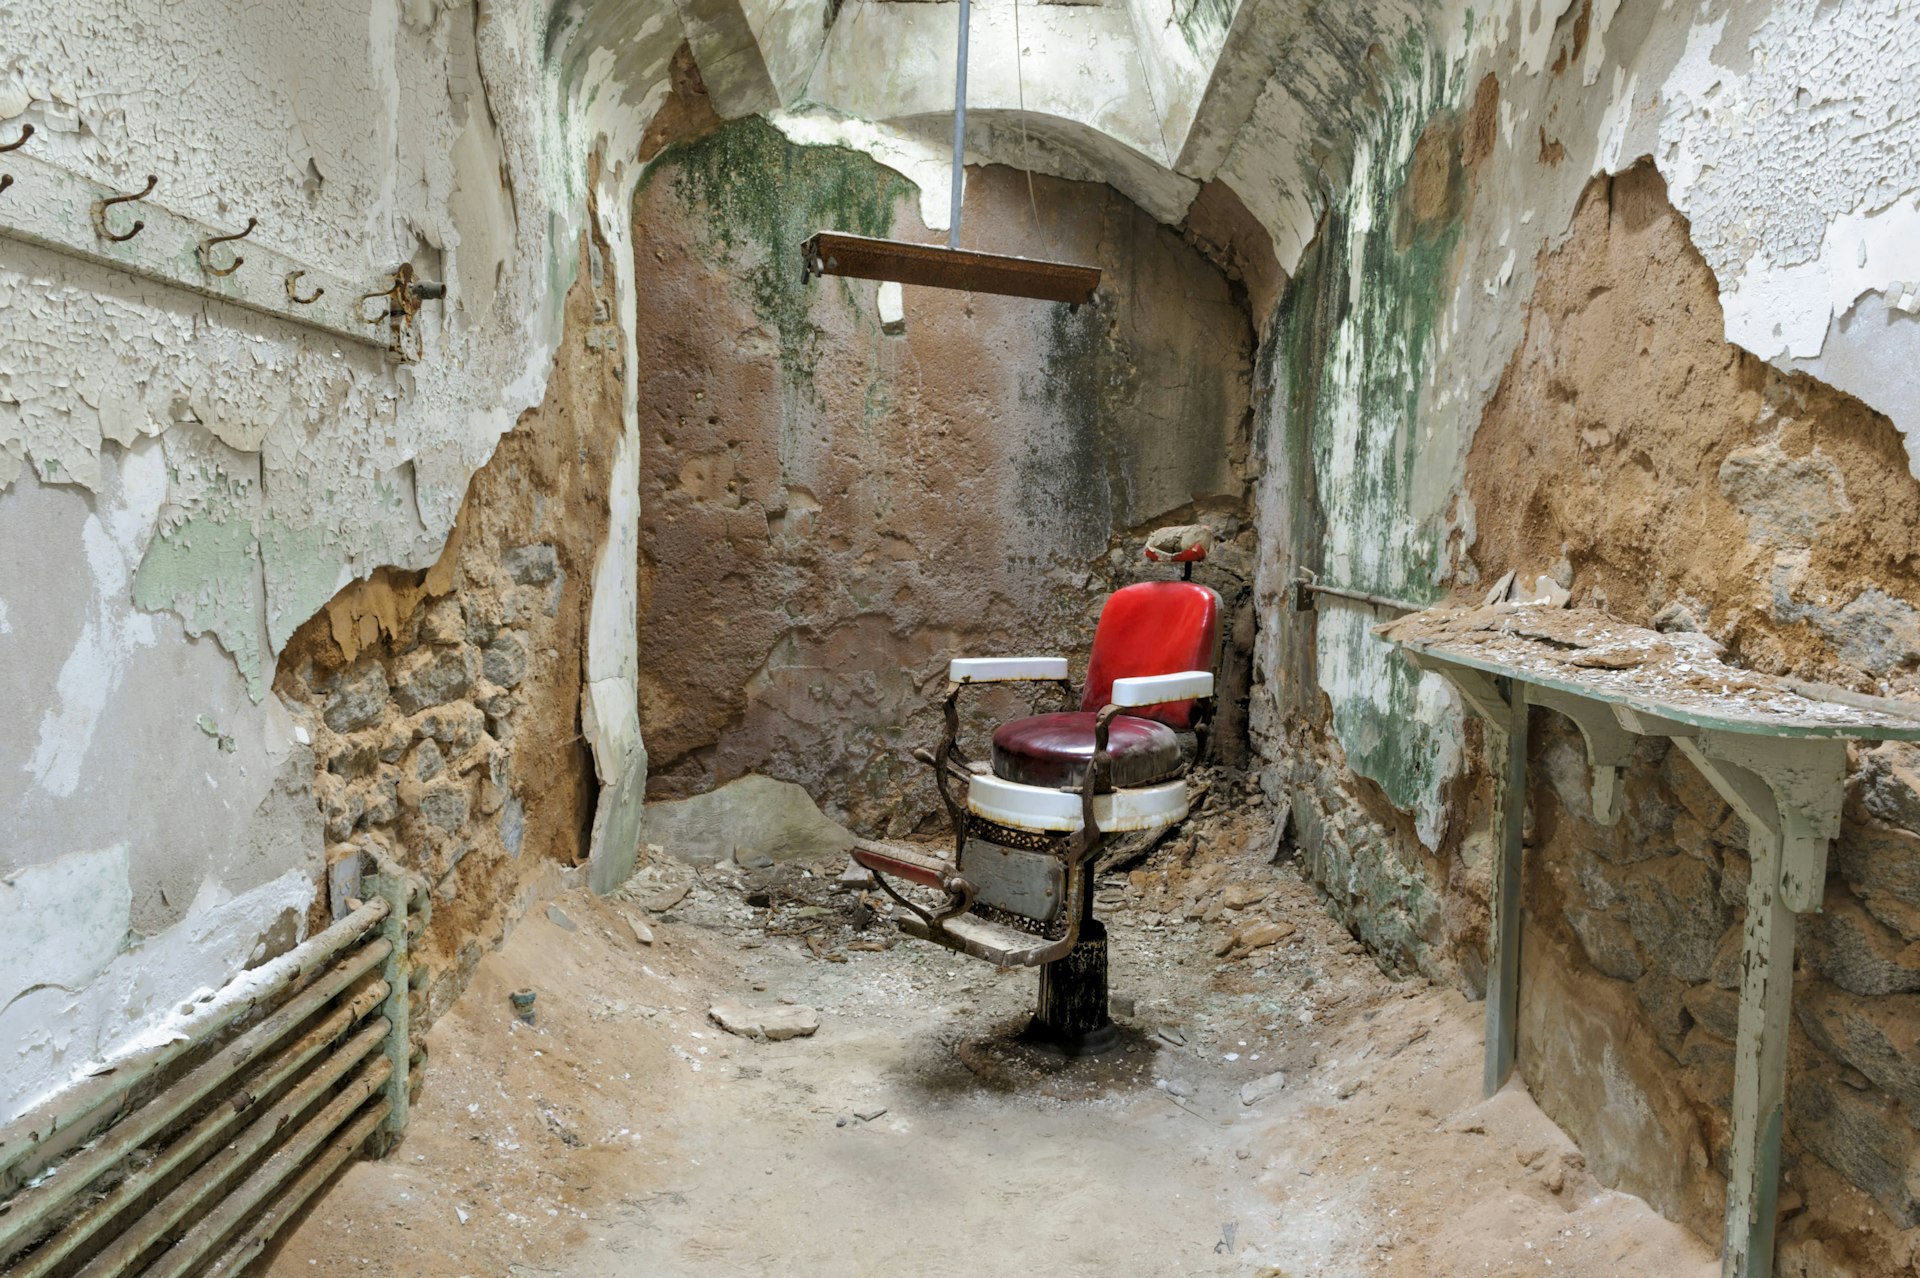 A barber chair sits in a decaying prison cell at Eastern State Penitentiary in Philadelphia